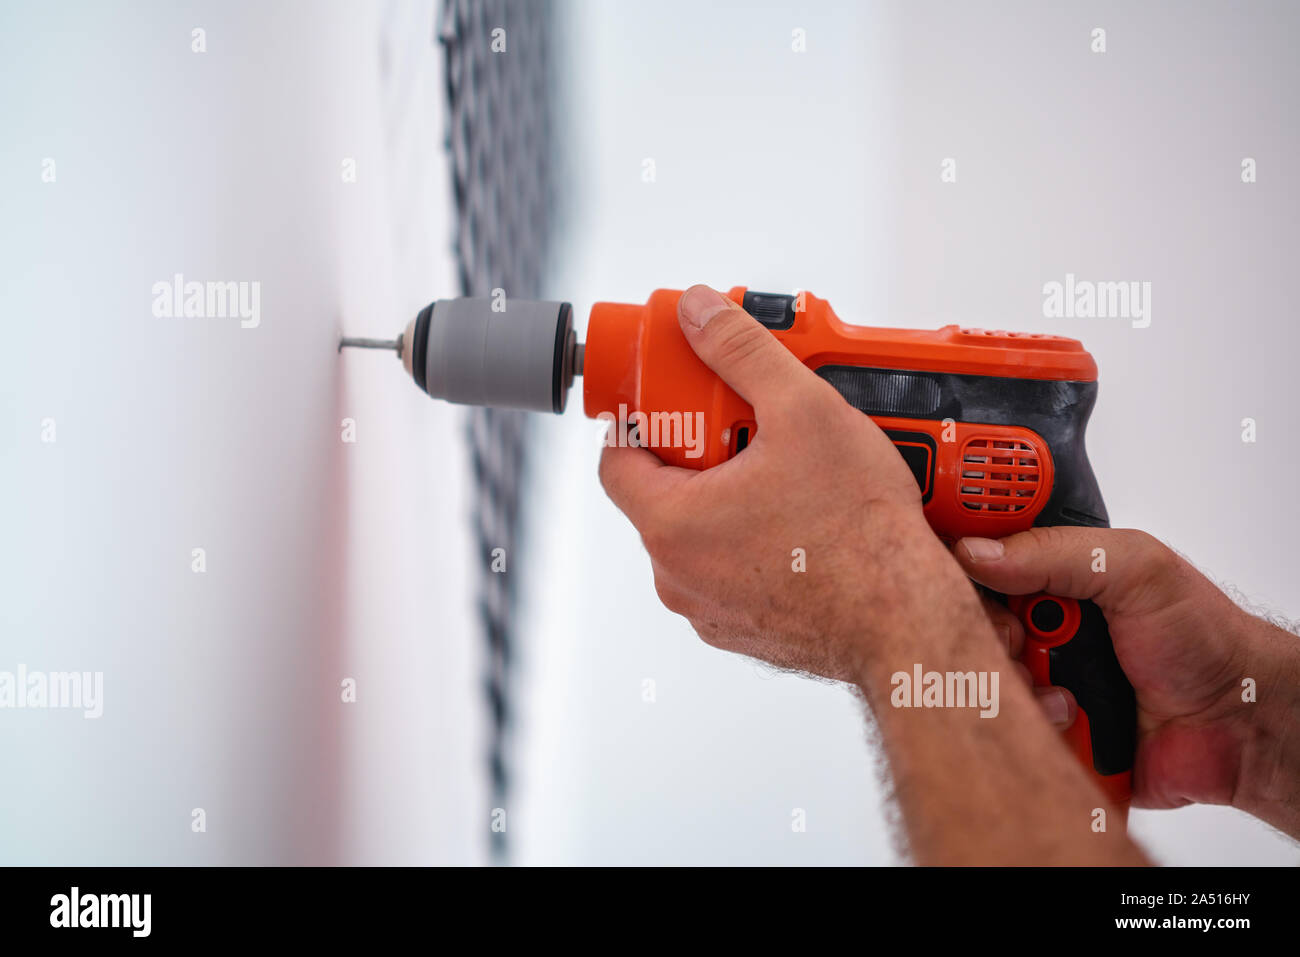 Drilling a hole on the wall for construction or renovation. Stock Photo